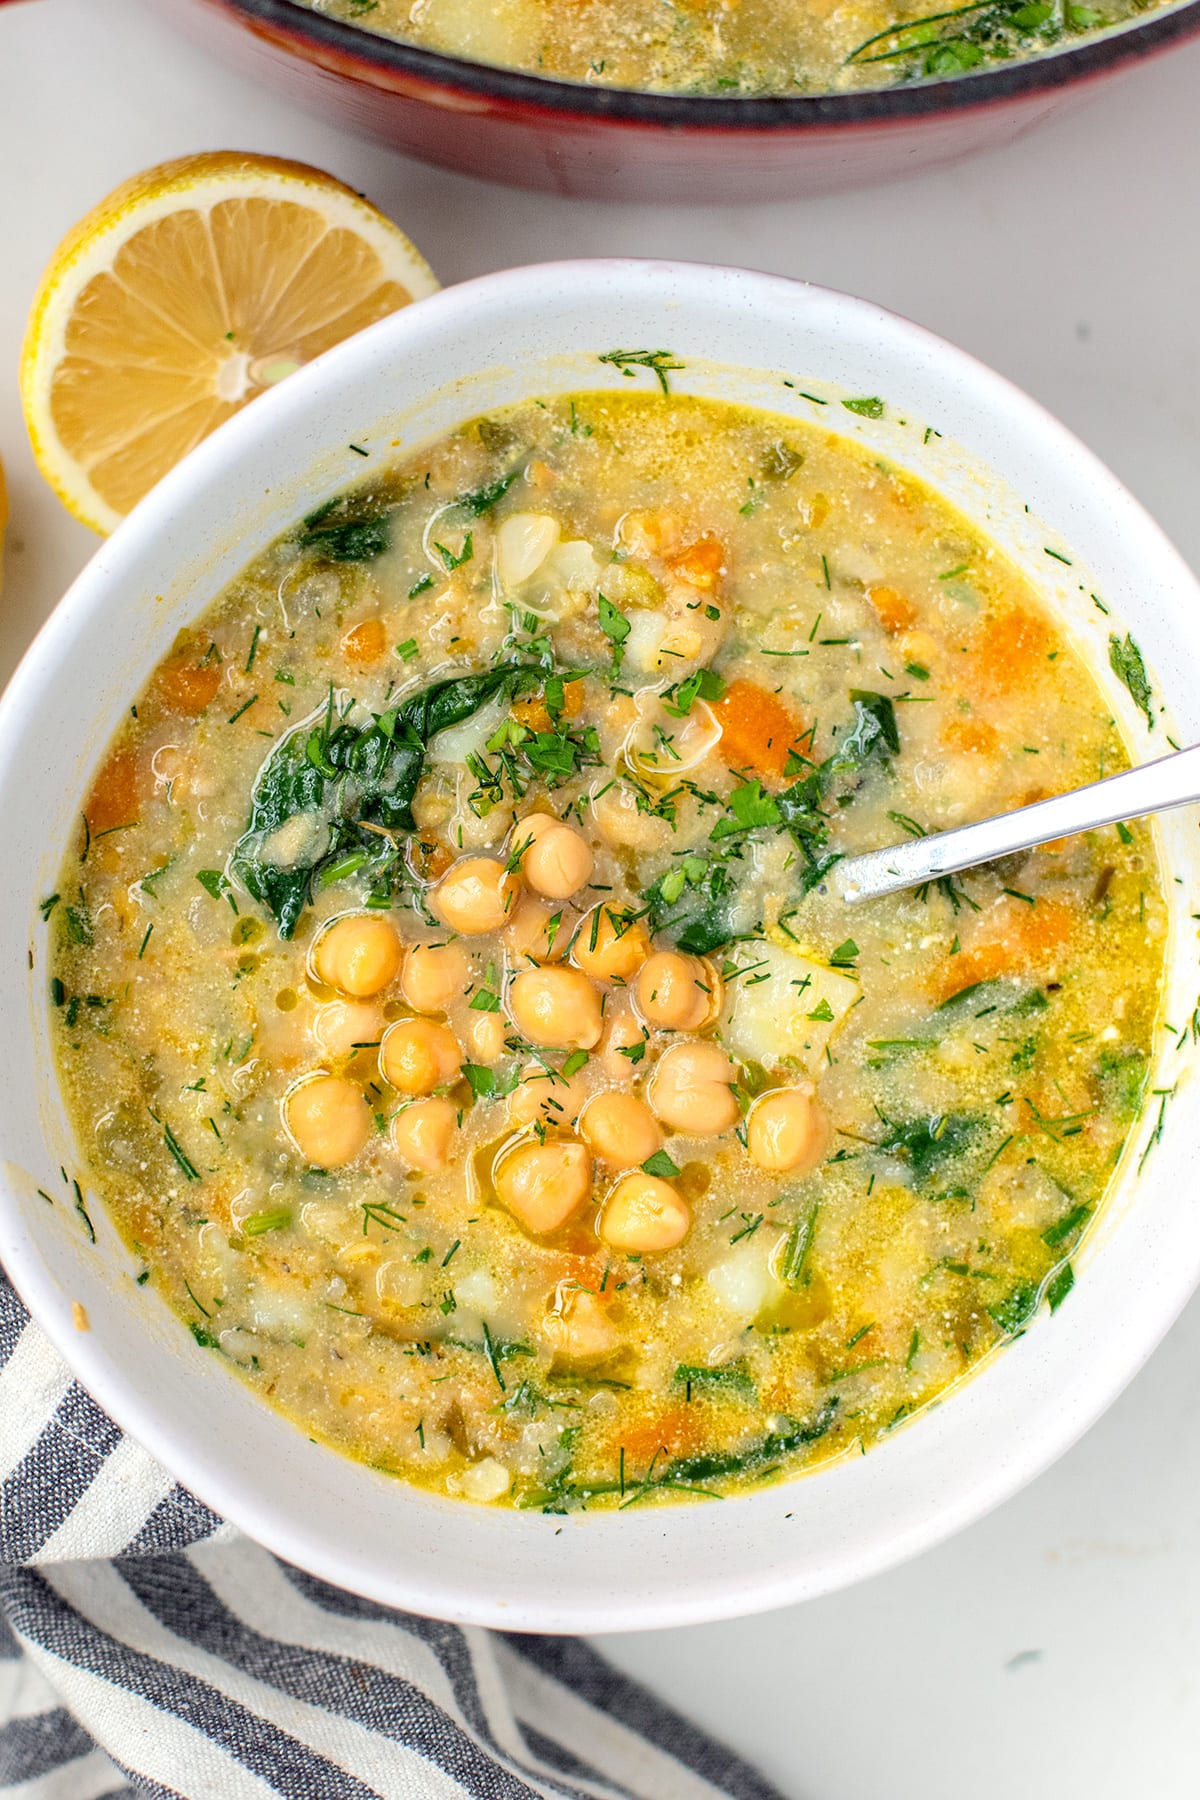 Chickpea soup recipe with potatoes, spinach, parsley, dill and lemon